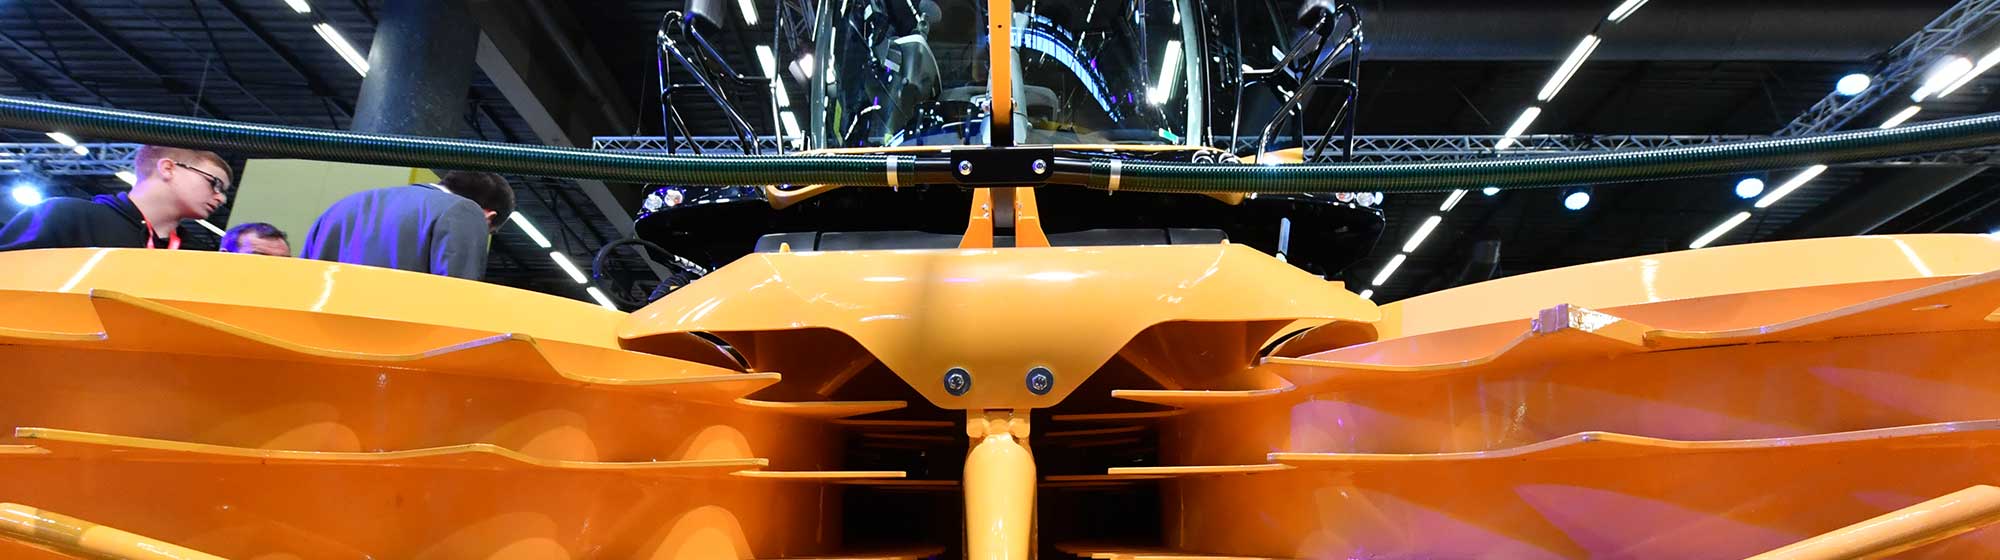 Front of a yellow agricultural machine